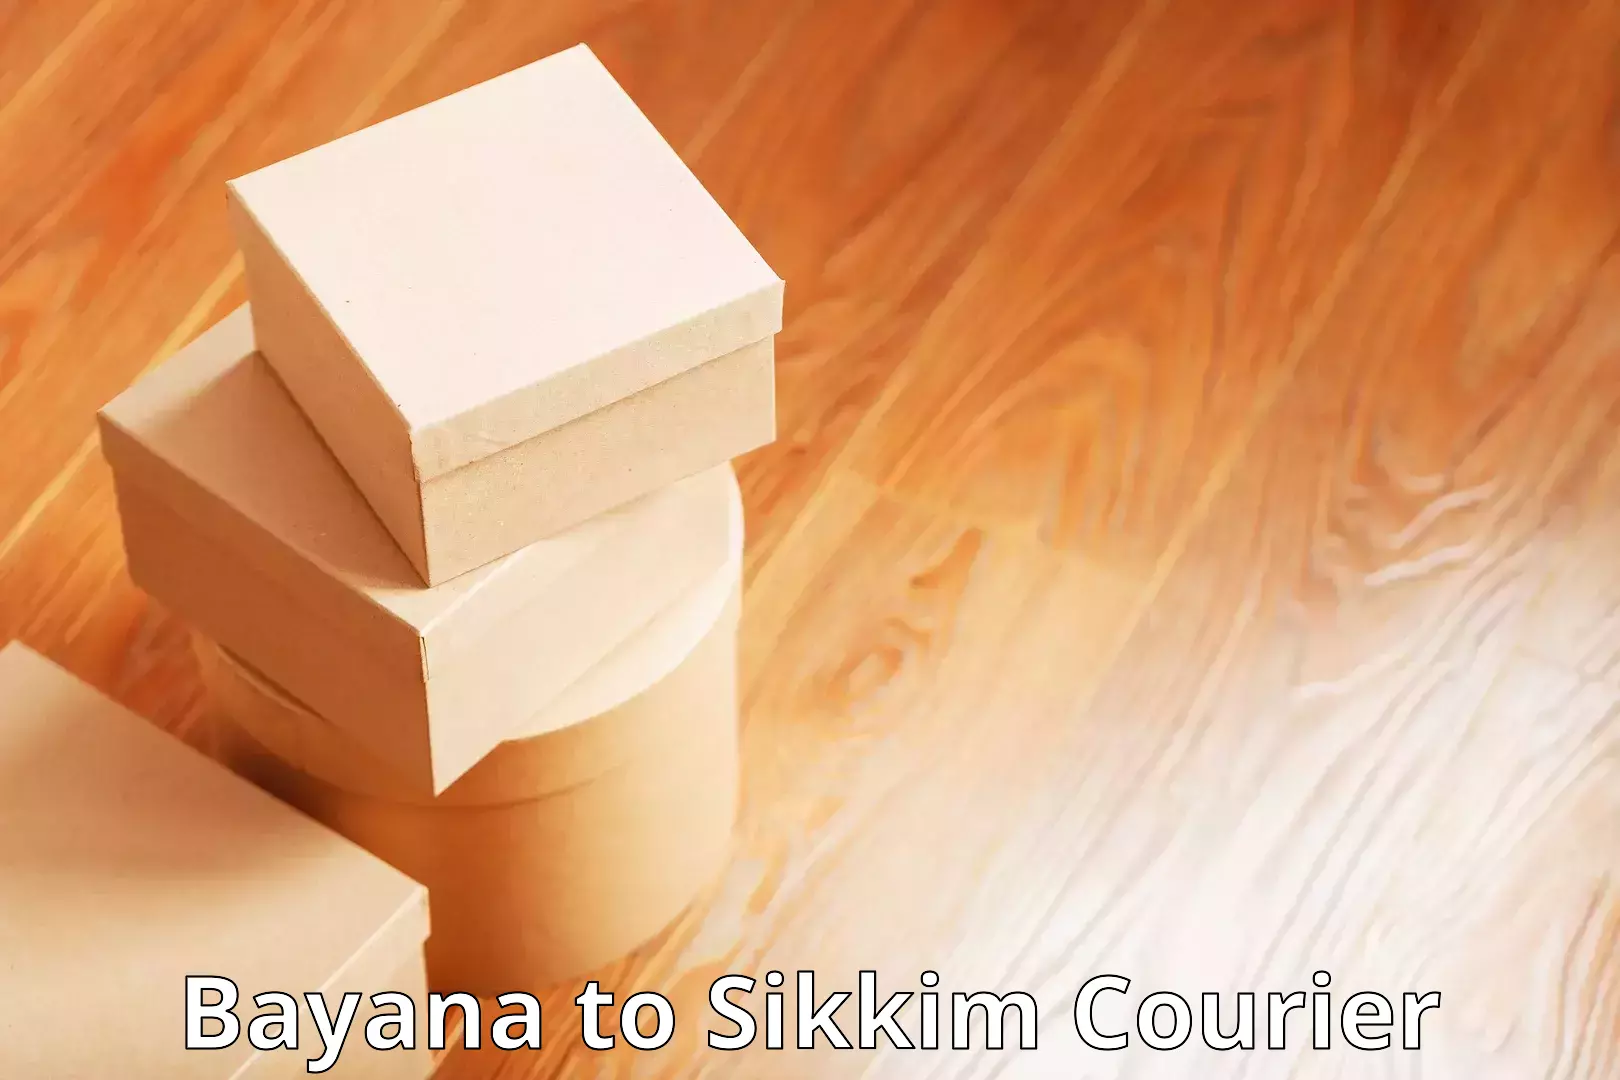 Customer-friendly courier services Bayana to Pelling